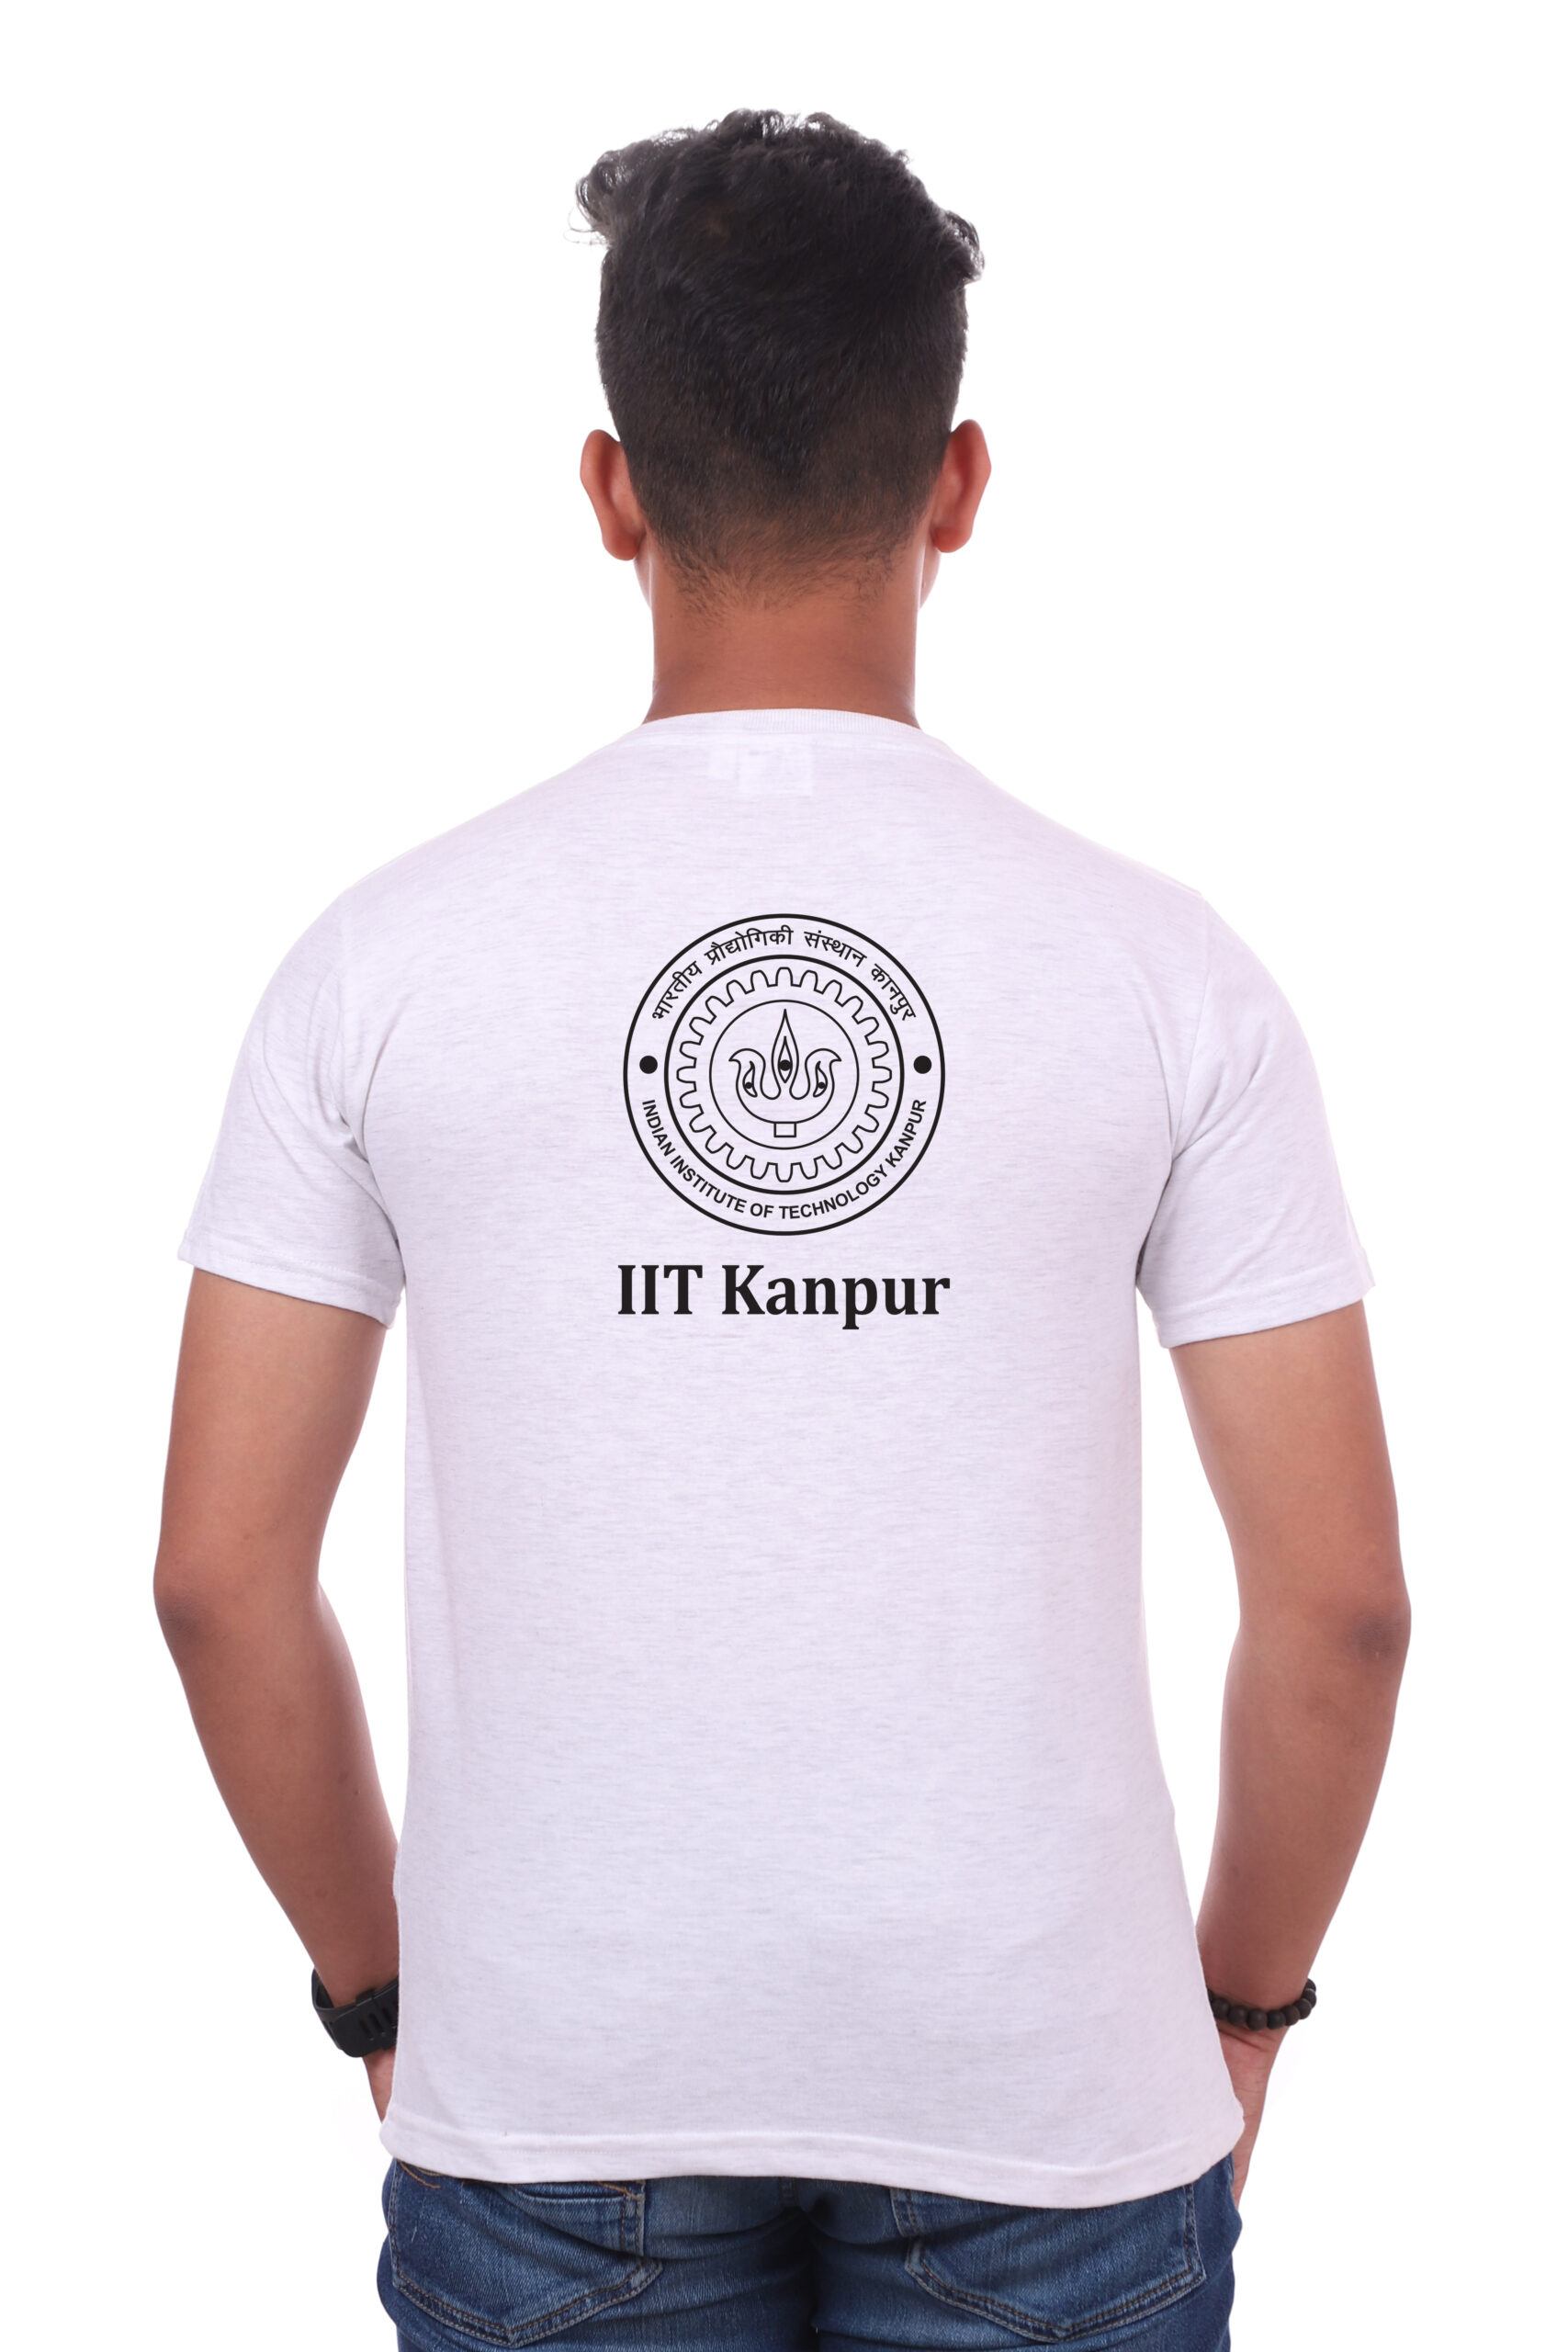 IIT Kanpur Recruitment 2022 for 119 Vacancies: Check Post, Age, Application  Method, and Other Details